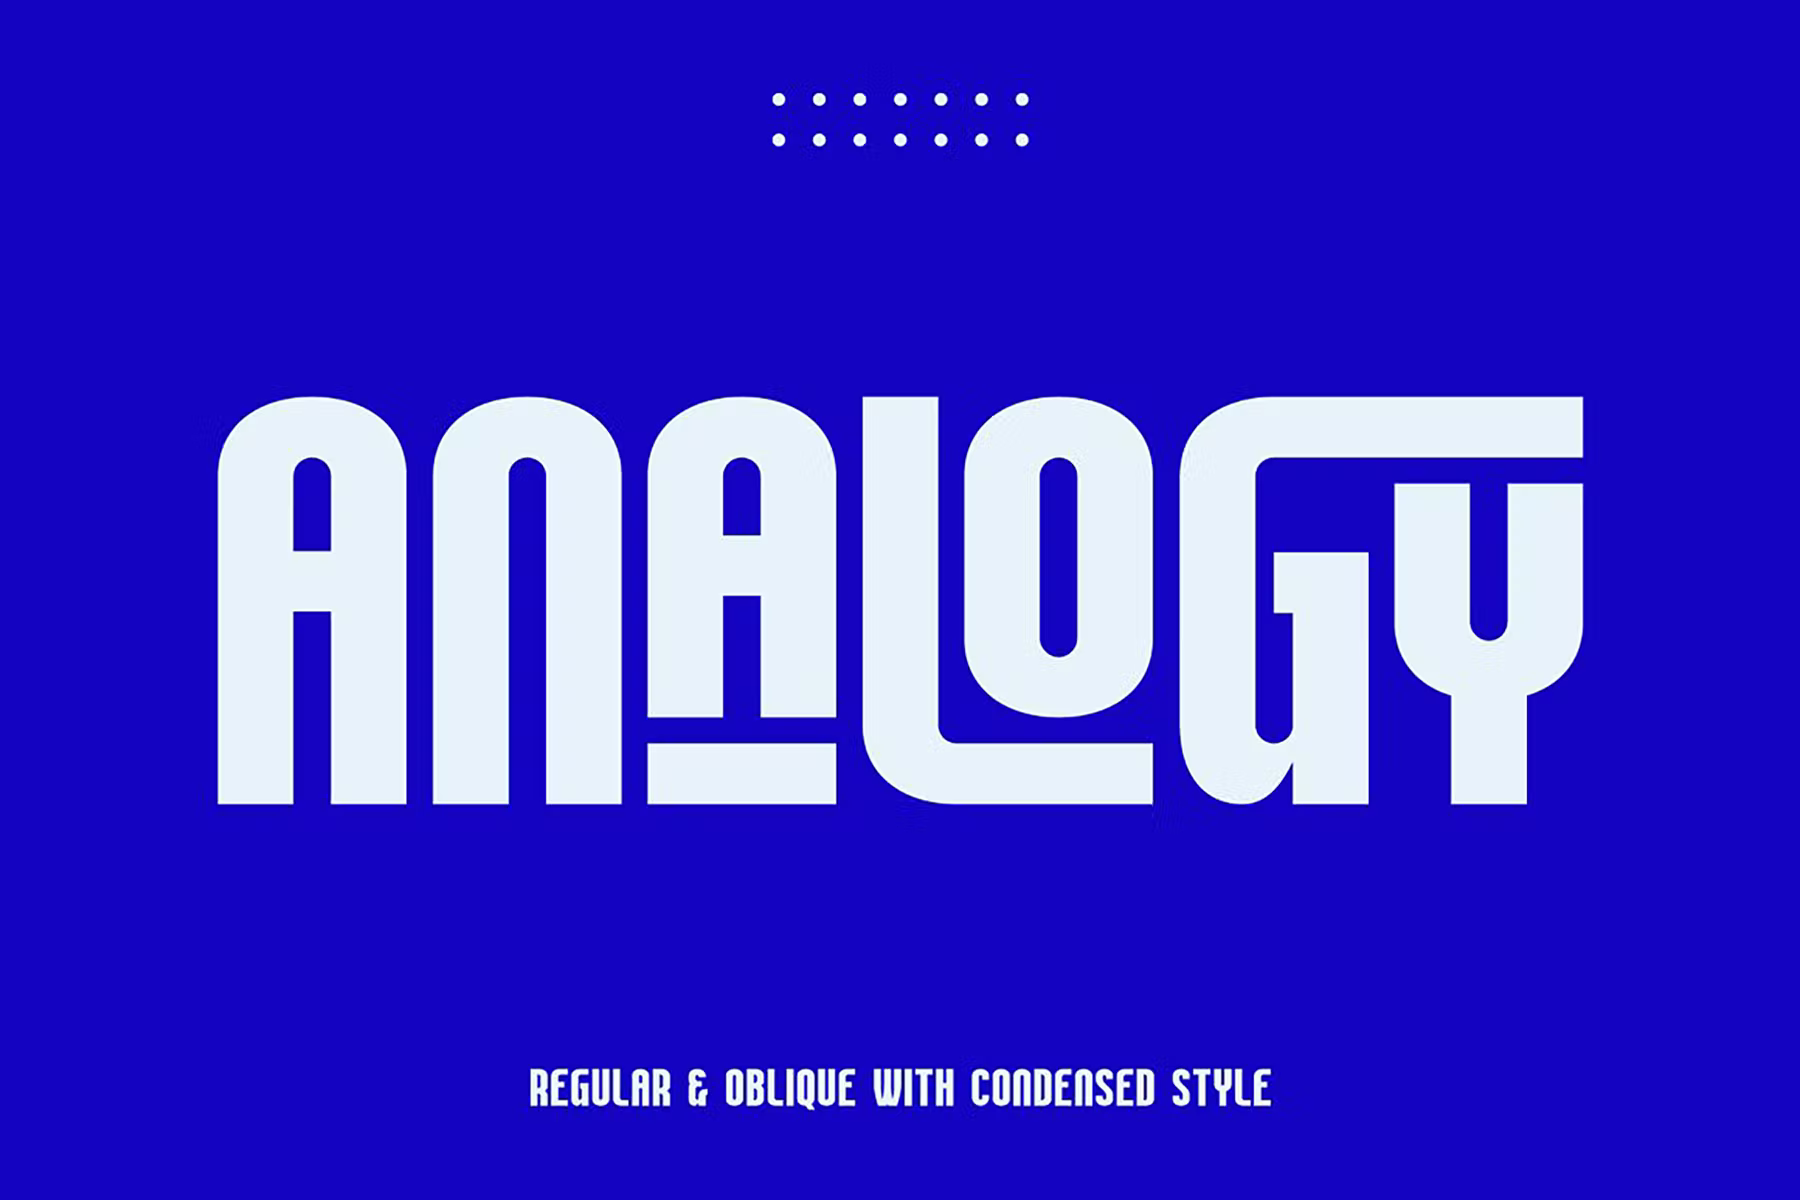 Popular sans serif font Analogy in a bold and large type on cobalt blue background. Text is 